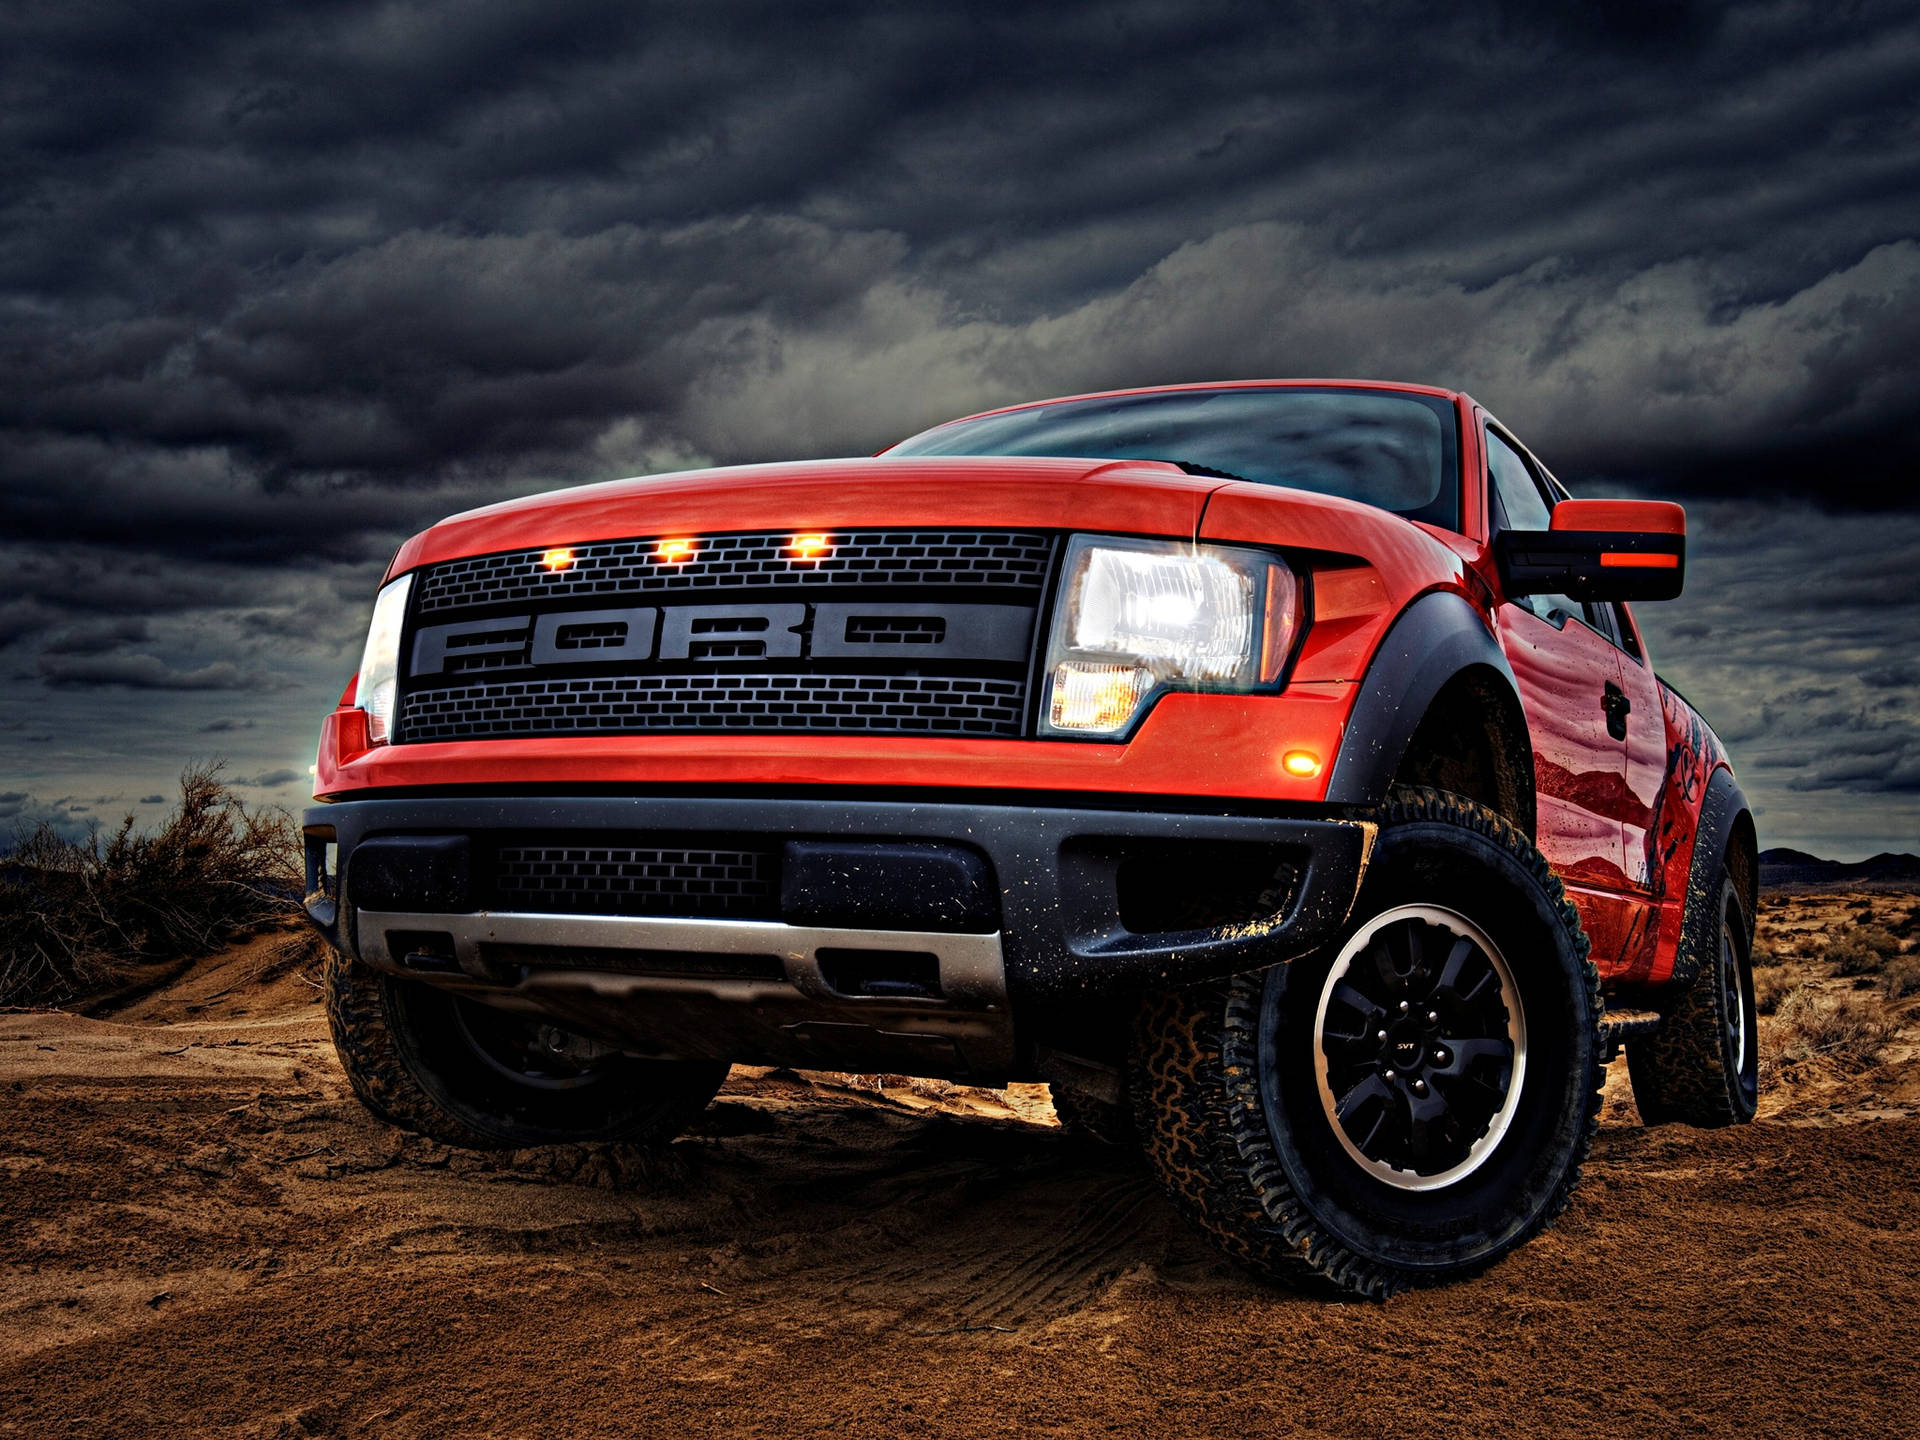 Ford Raptor In Gloomy Weather Background